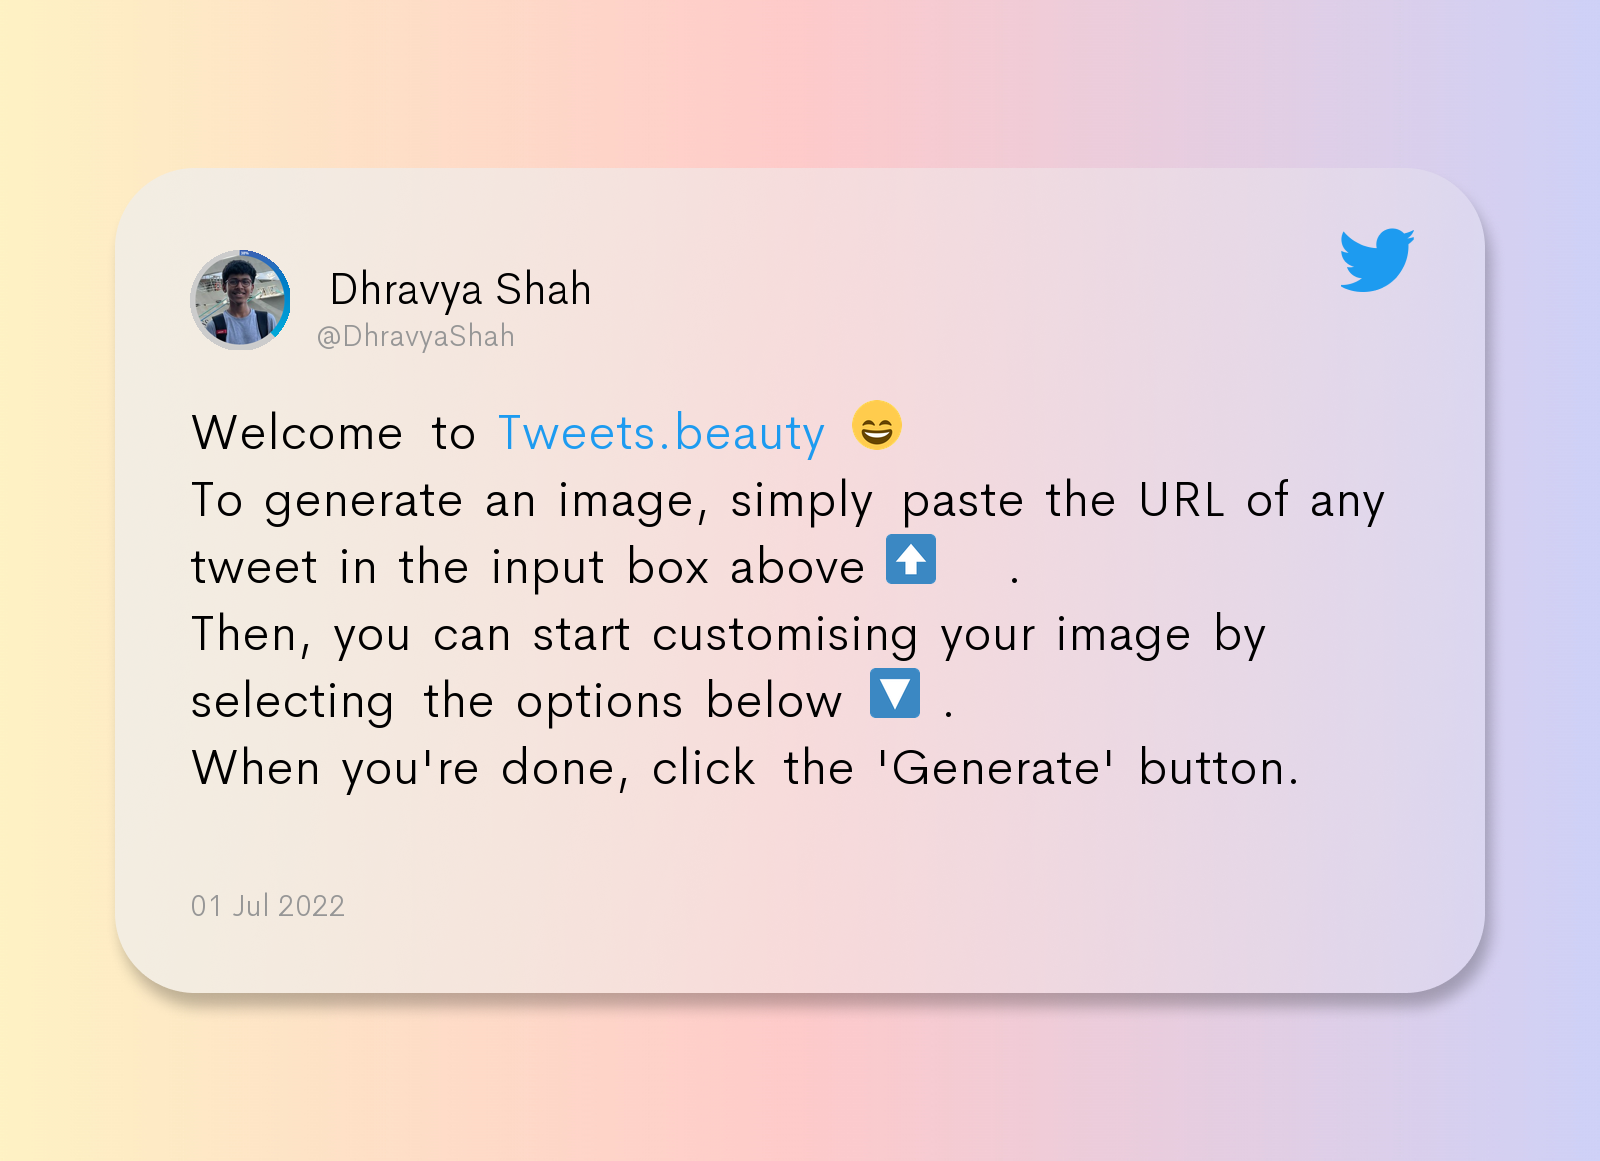 To generate an image, paste the URL of a tweet in the input box above. Then, customise your tweet with the options below. When you're done, click on the generate button.